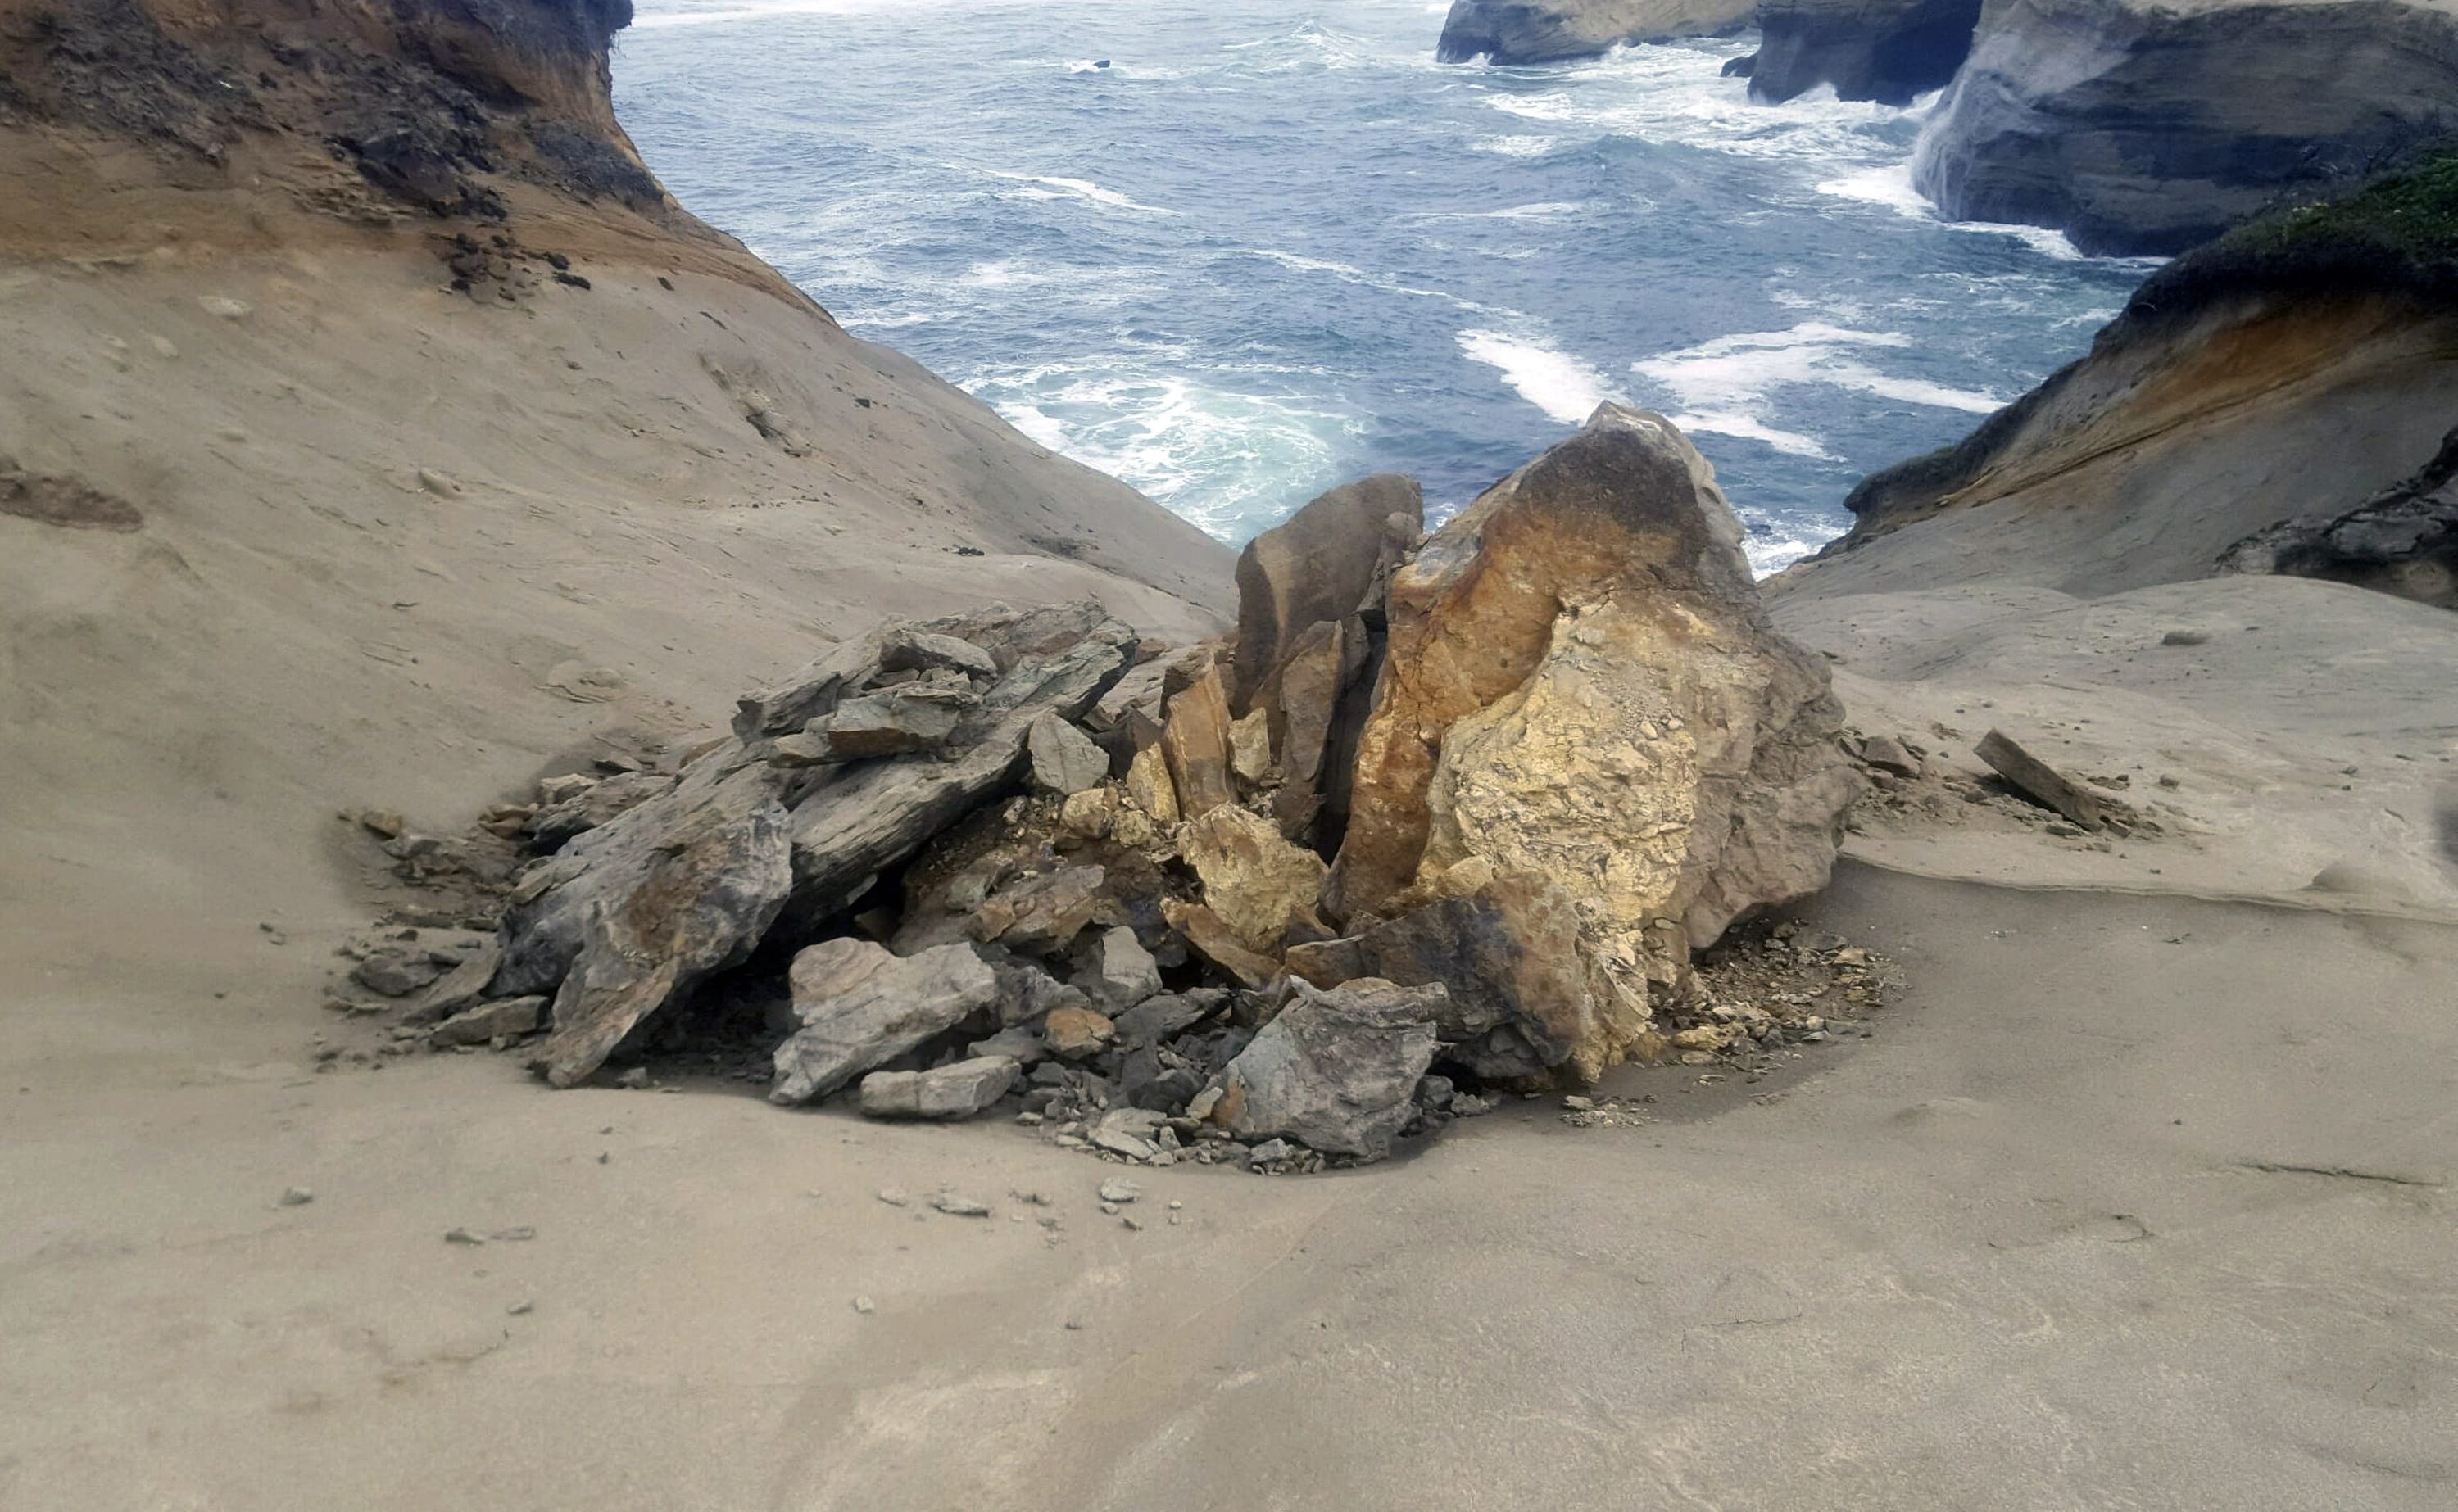 This undated photo provided by State of Oregon, Oregon Parks and Recreation Department shows a natural rock formation that was found in pieces last week at Cape Kiwanda State Natural Area  which is a state park in Pacific City, Ore. The sandstone pedestal was roughly 7 feet to 10 feet across and located in a fenced off section of the park. Oregon State Parks officials originally said they did not think the break at the site frequented by tourists was caused by humans but cellphone video captured a group of people knocking over the popular sandstone rock formation known as the "Duckbill" on the Oregon beach.